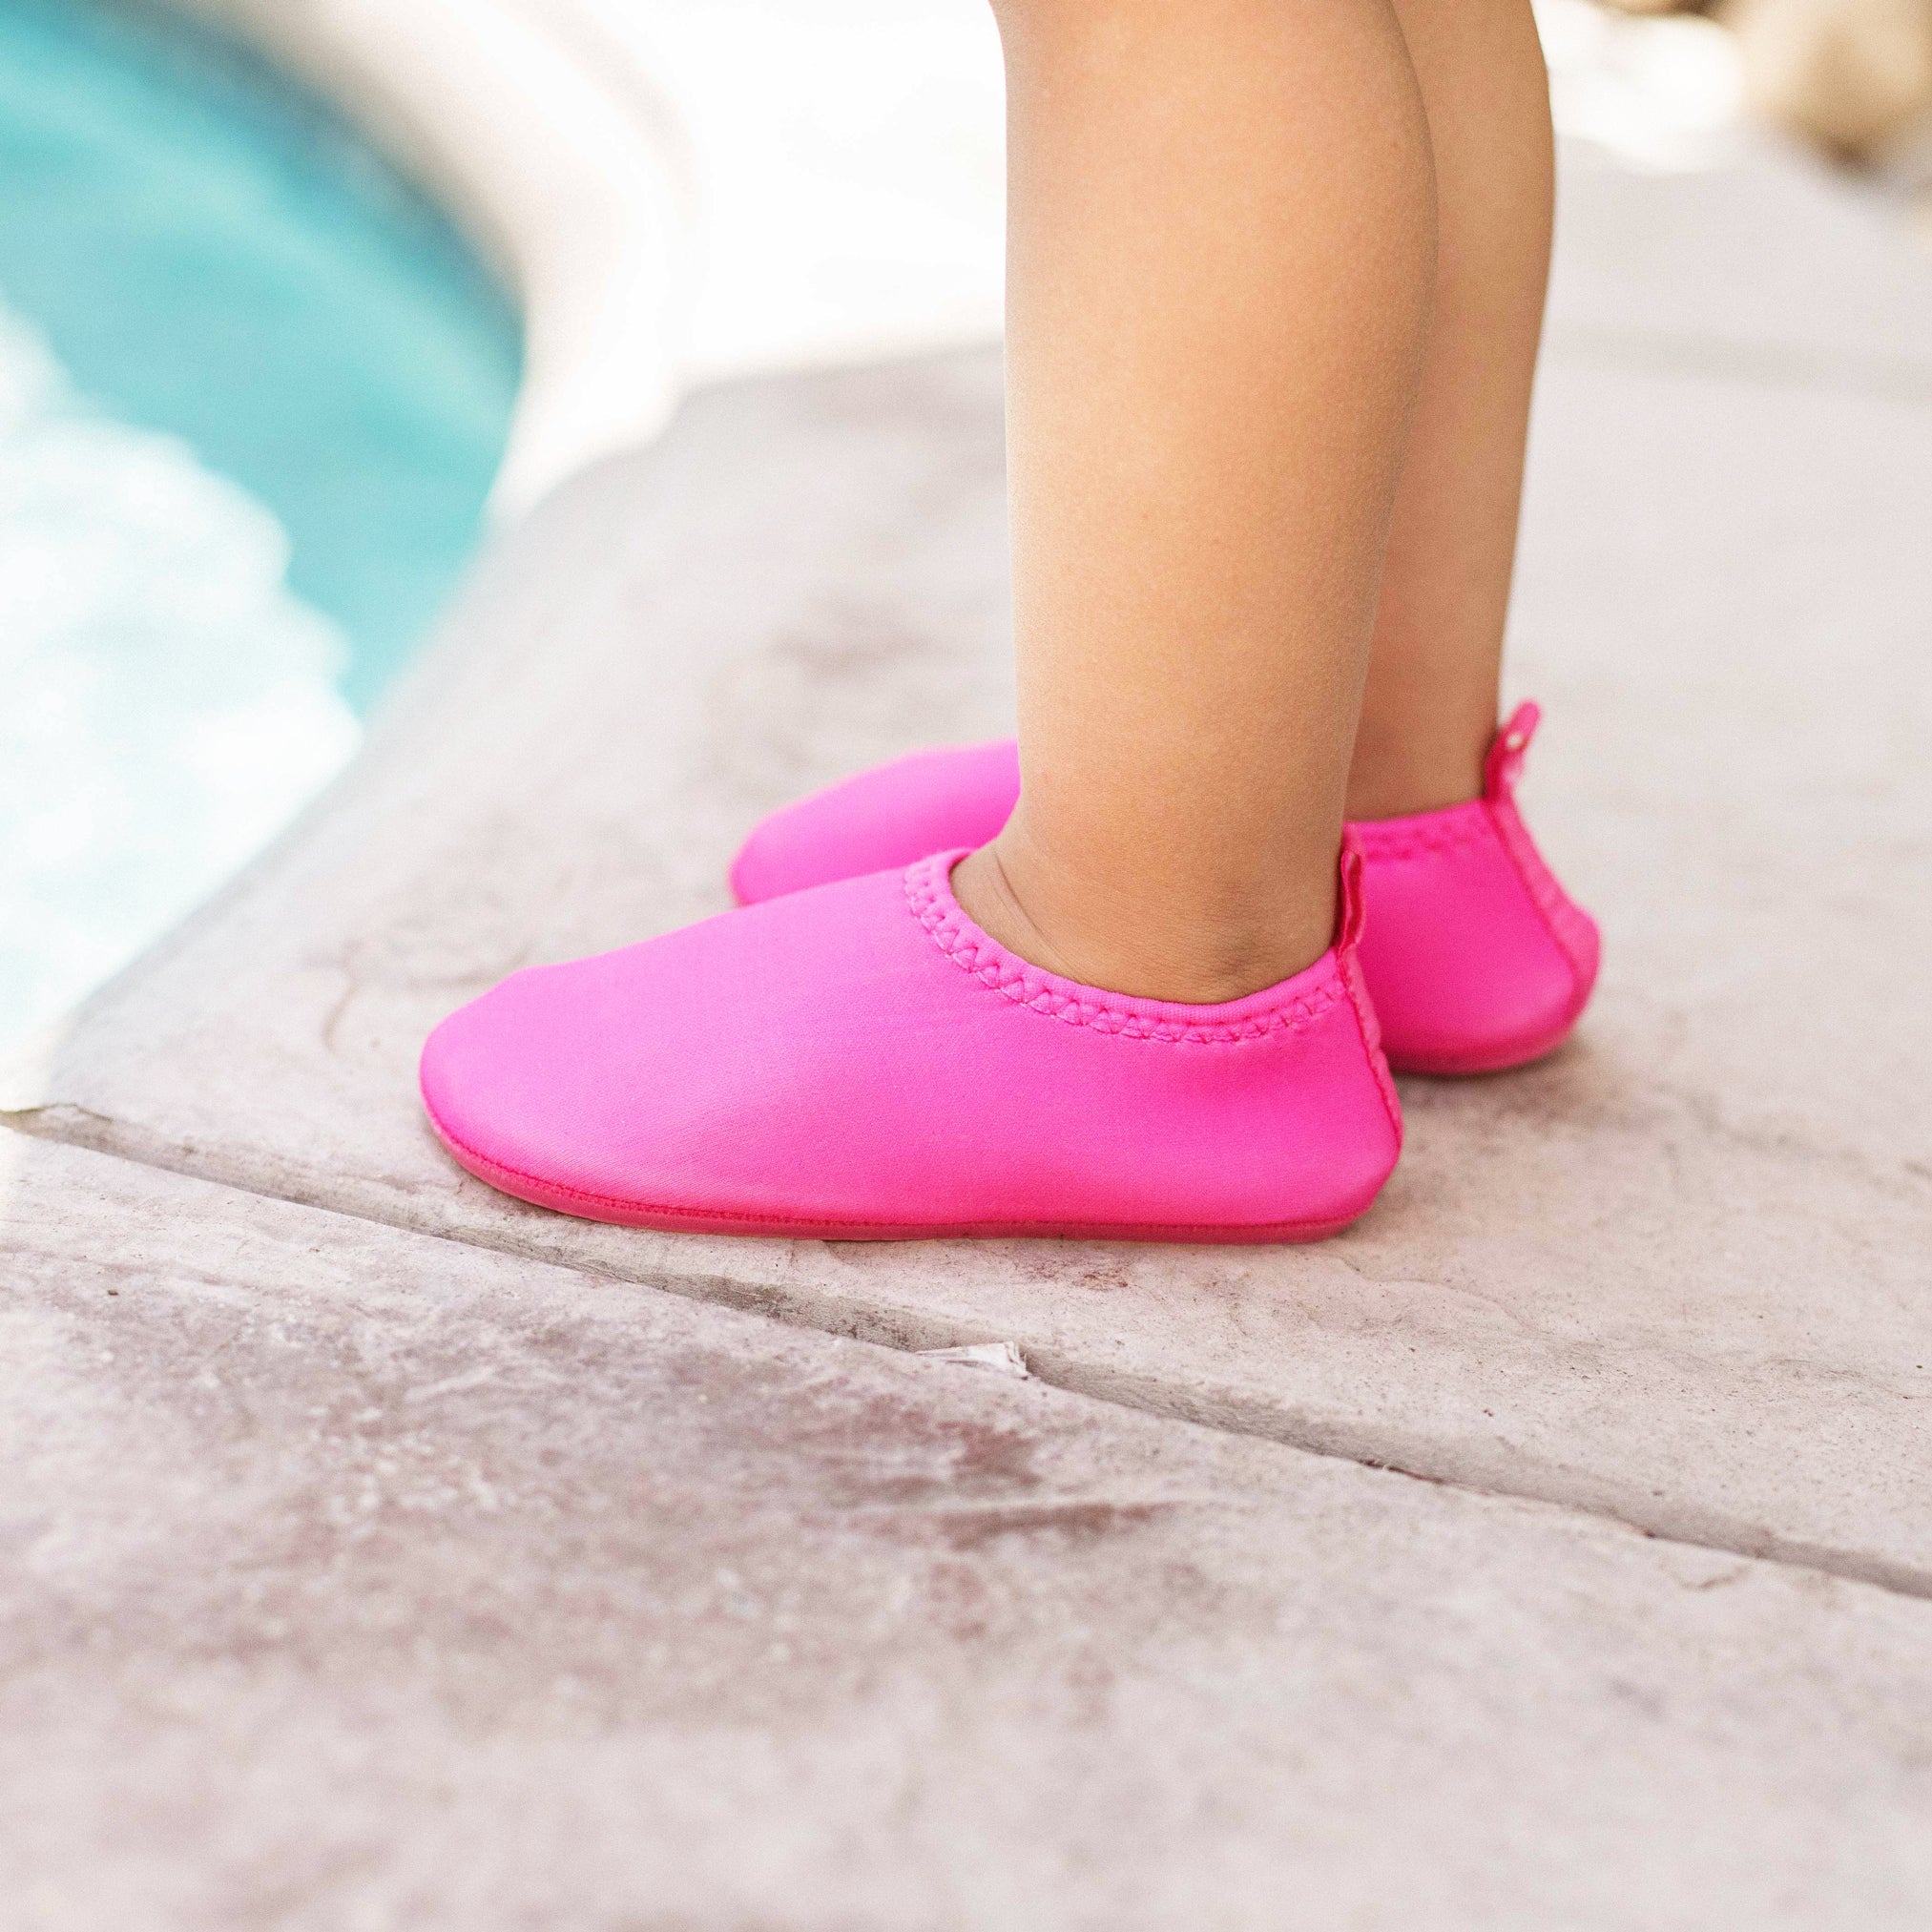 i play.® by Green Sprouts® Baby Water Socks offer non-slip soles, quick-dry comfort, and are free of harmful chemicals. Perfect for pool, beach, and water park fun! Shop now and ensure your child's safety and comfort while playing in and around water.